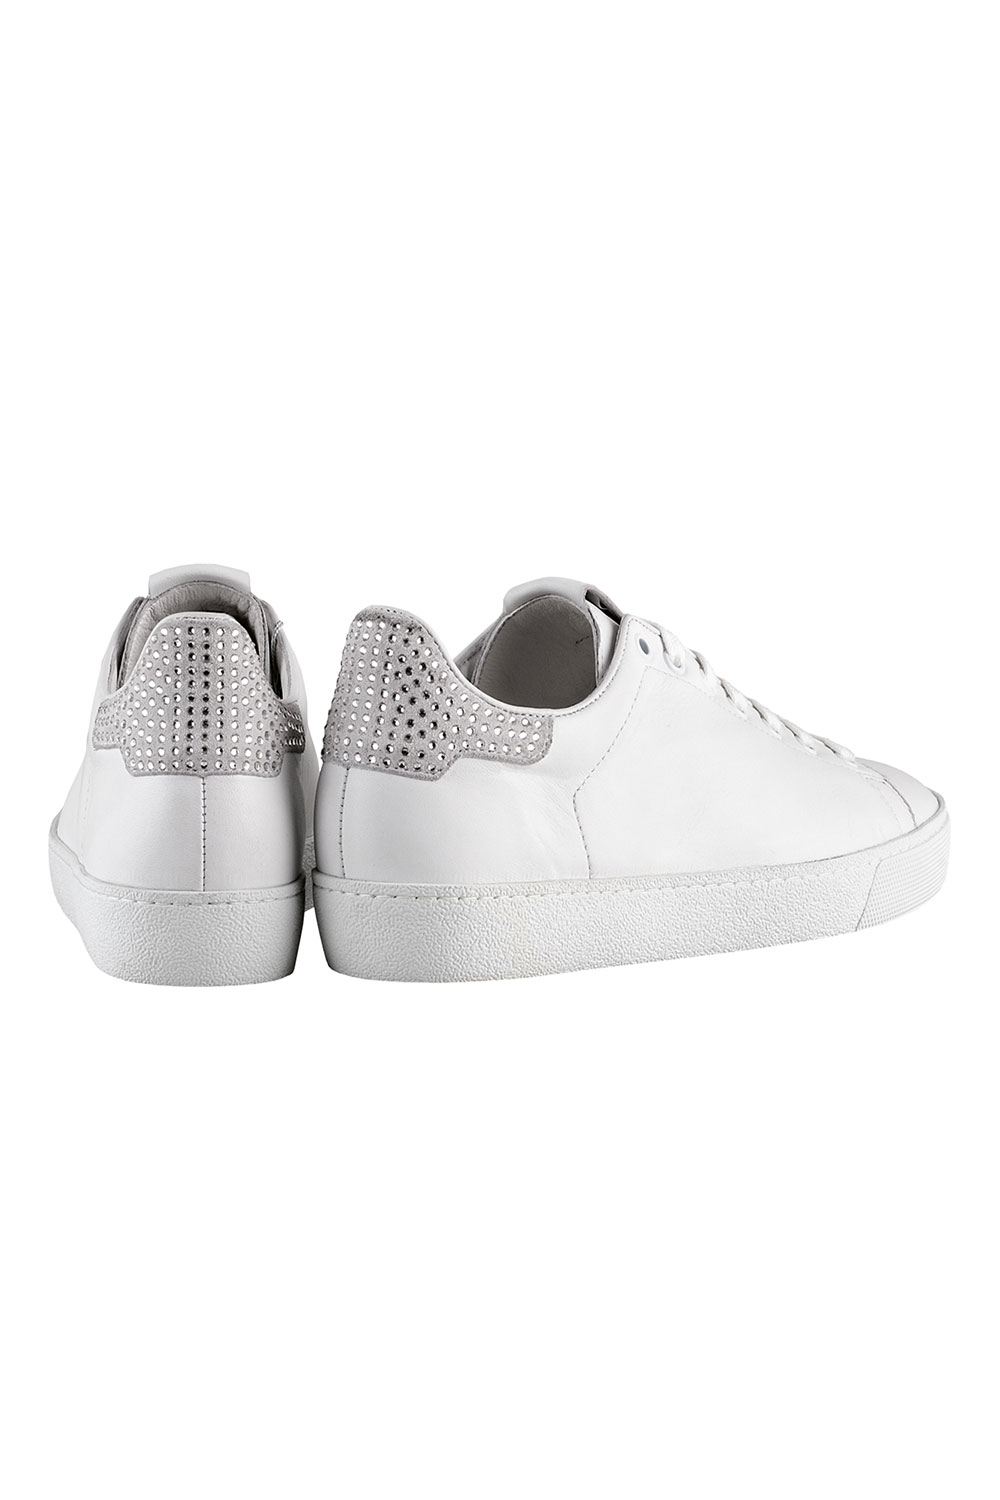 Hogl : White Leather Trainers with Crystal Heels - jojo Boutique